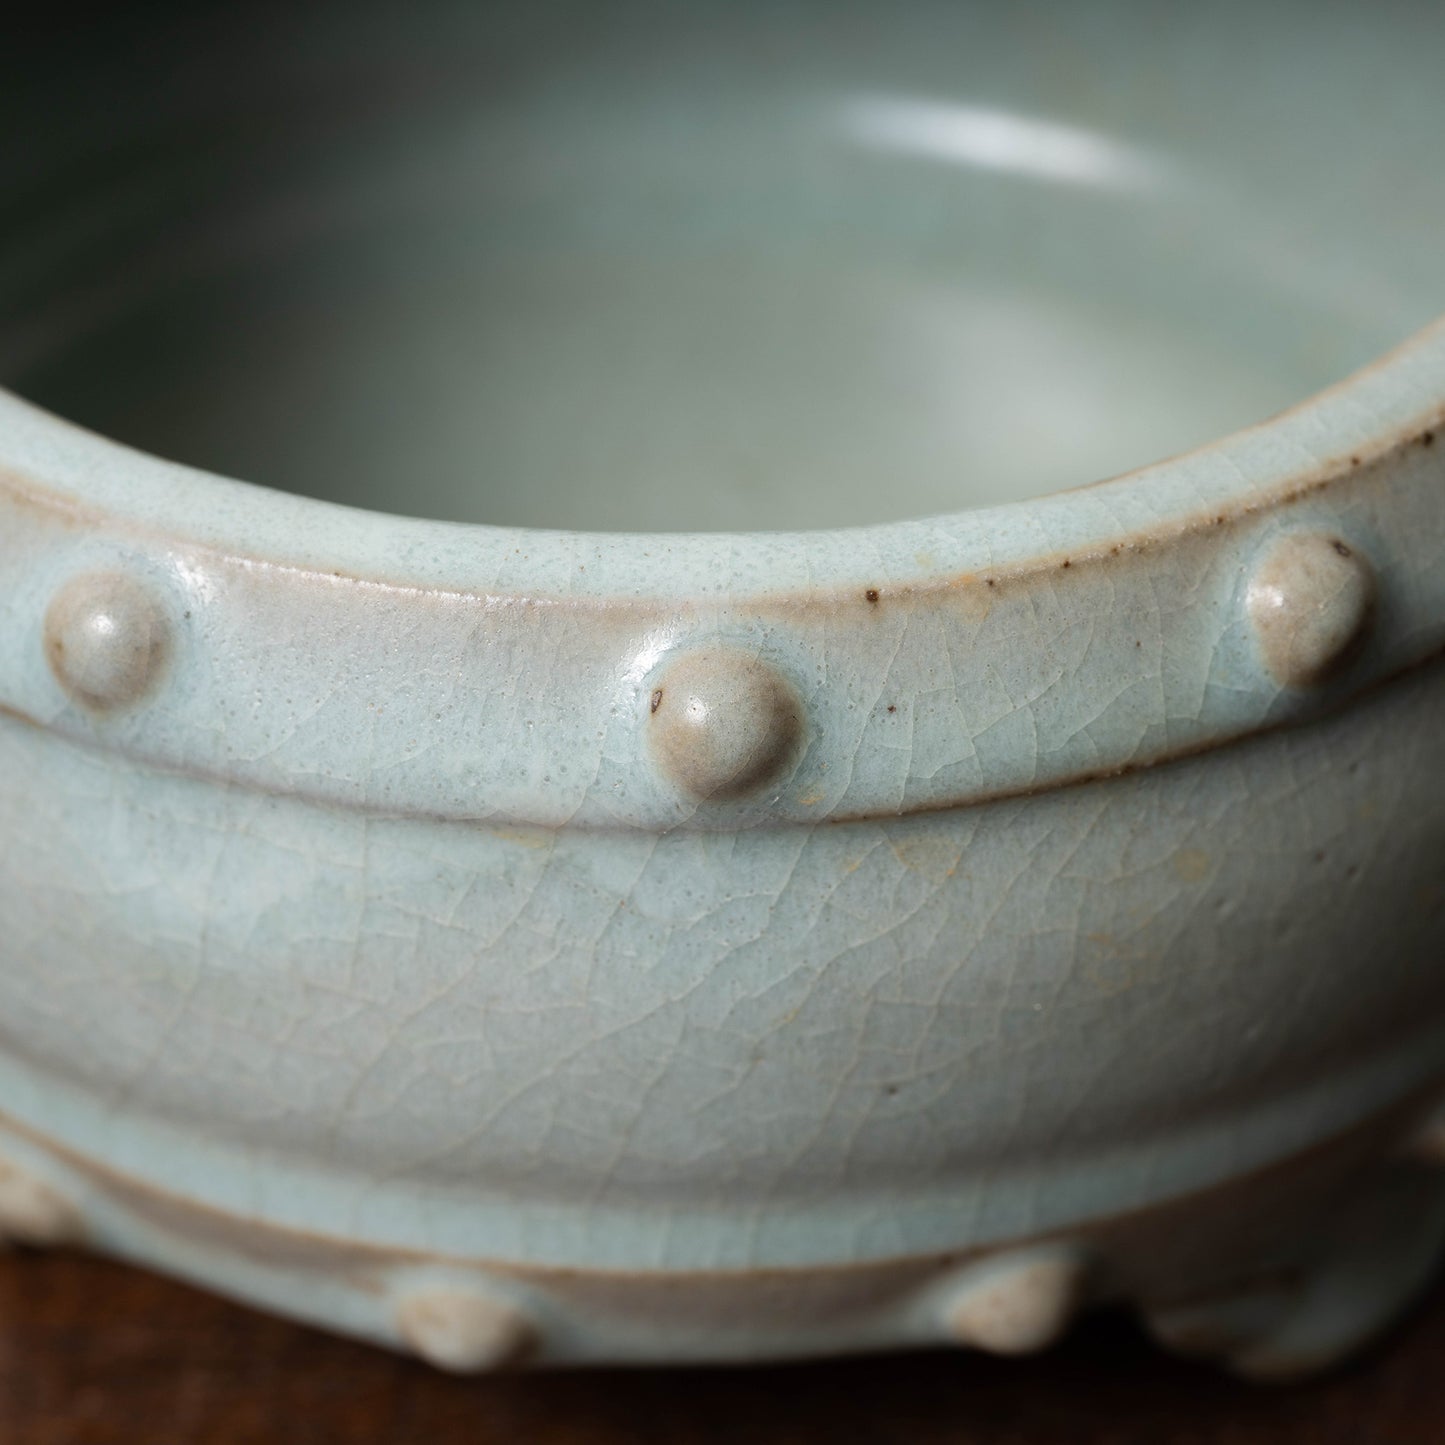 Southern Song Dynasty Guan ware Celadon Bowl with Rivet and Three legs